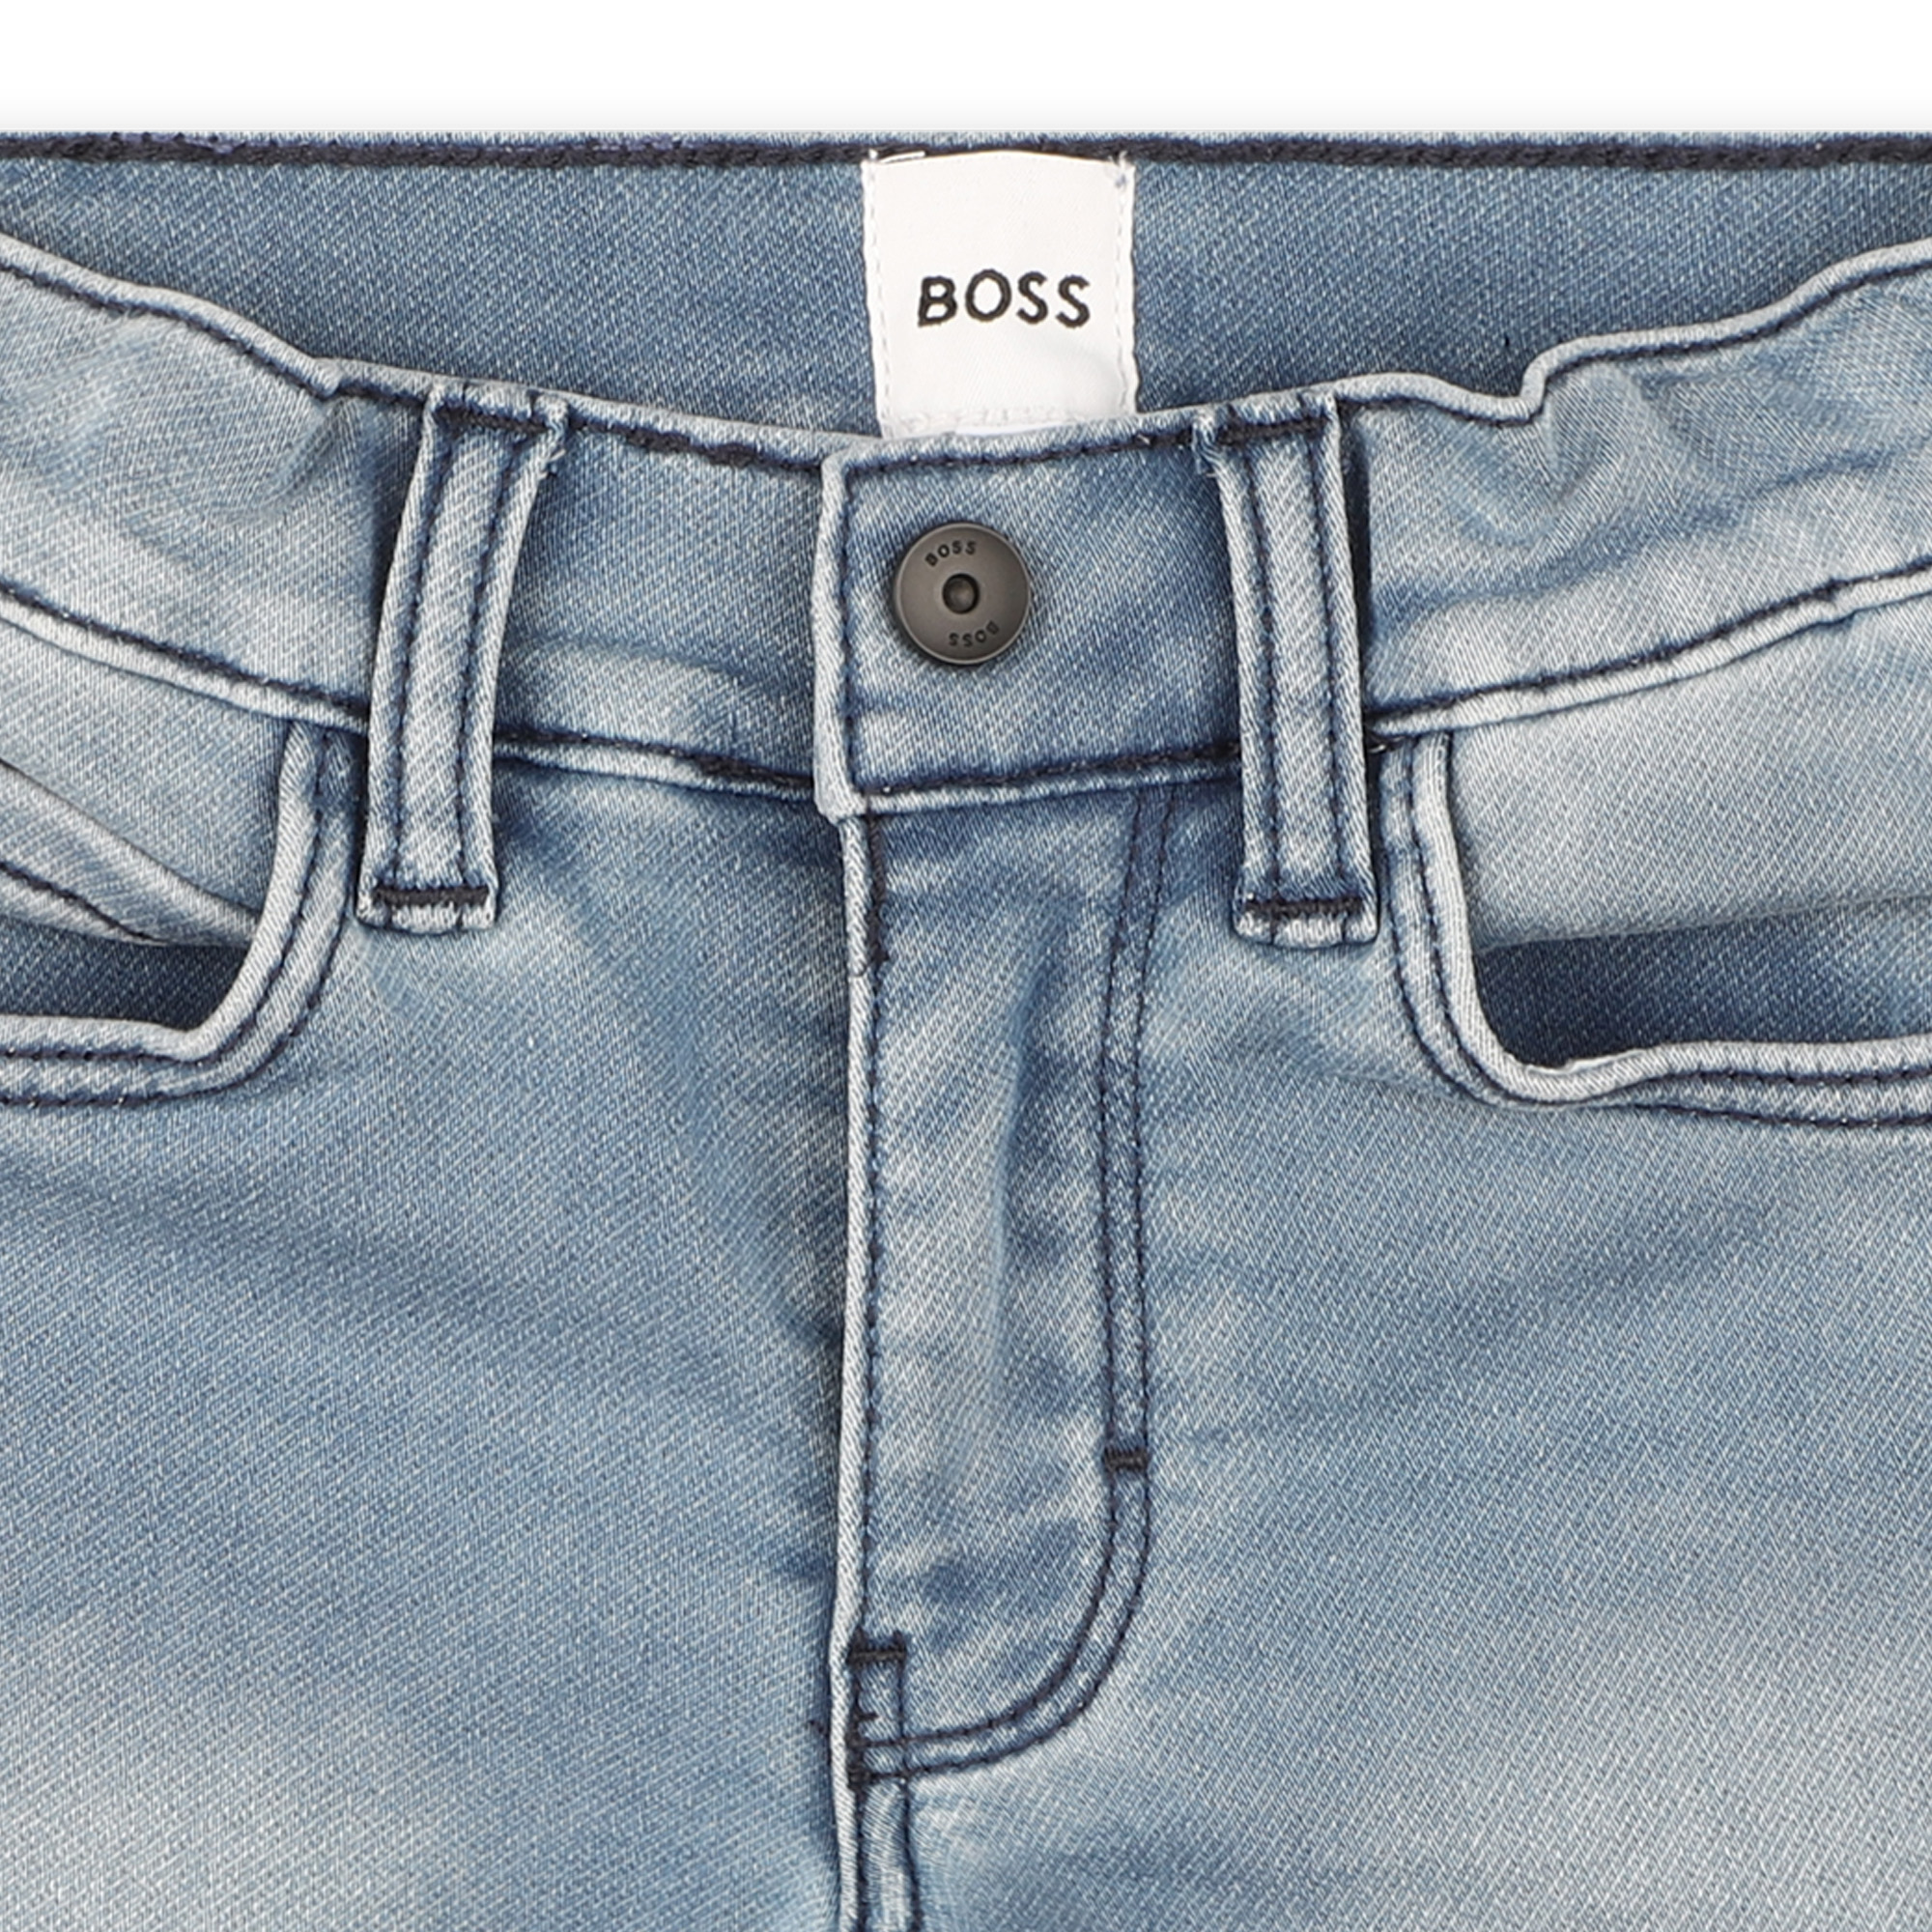 Cotton and lyocell jeans BOSS for BOY